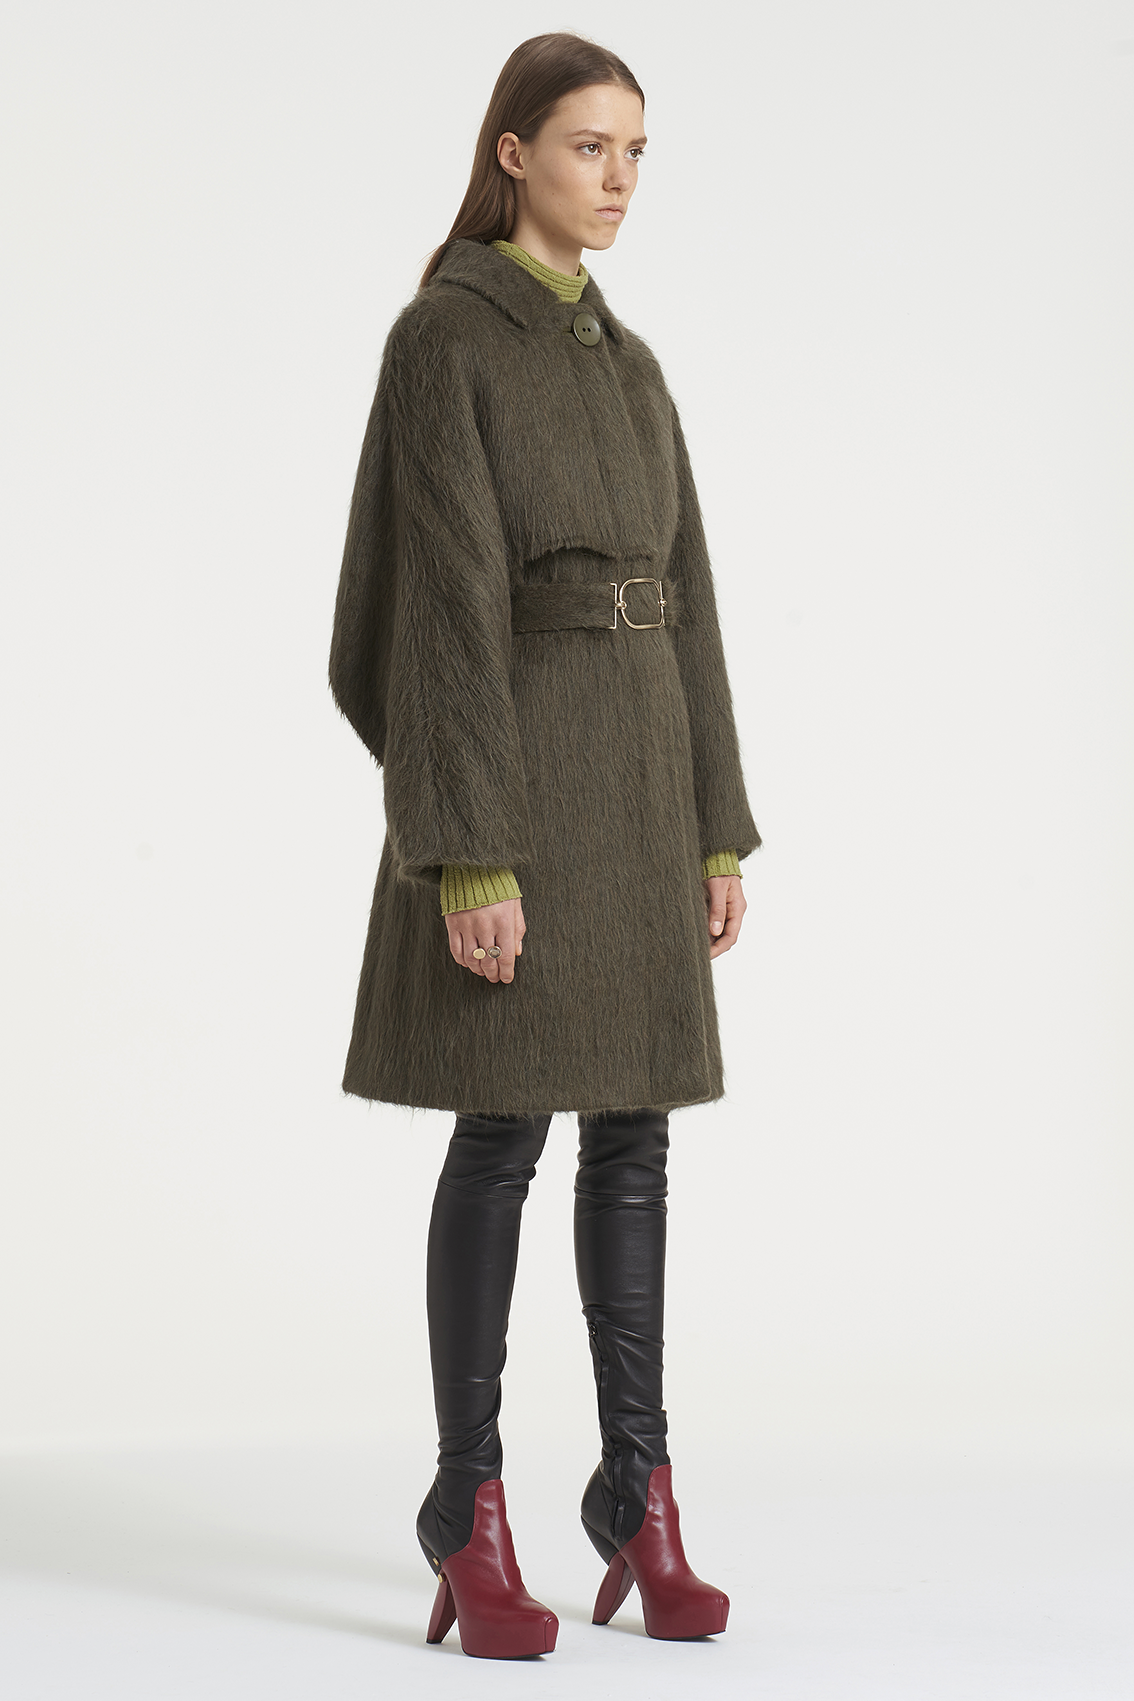 Wool Caped Trench Coat